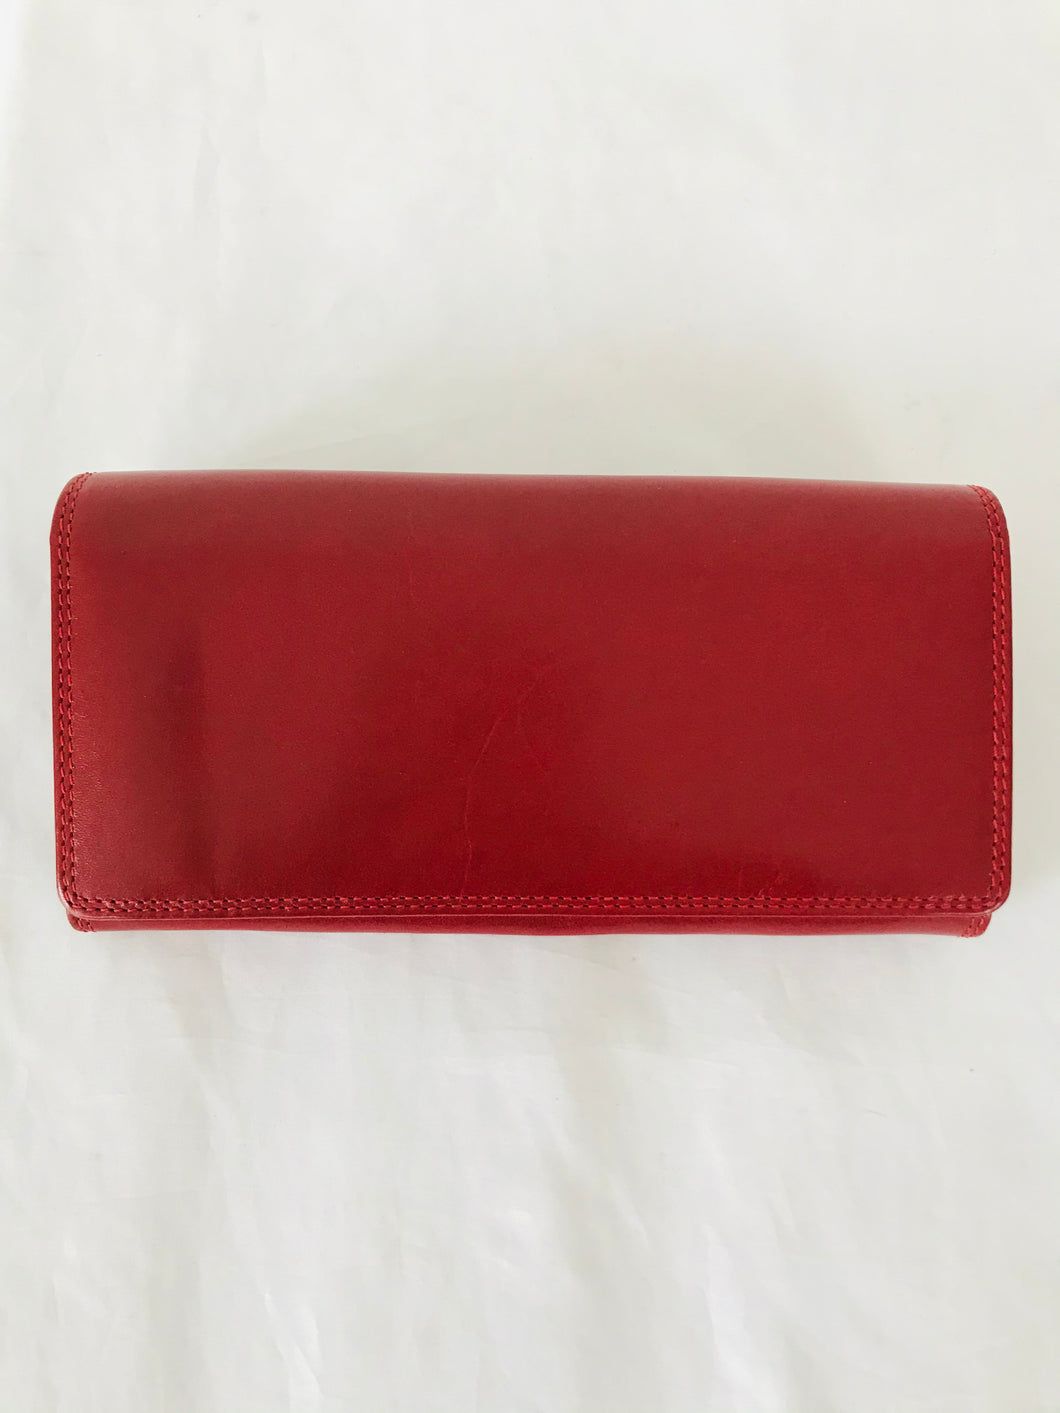 Visconti Women’s Leather Clutch Purse Wallet | Small | Red